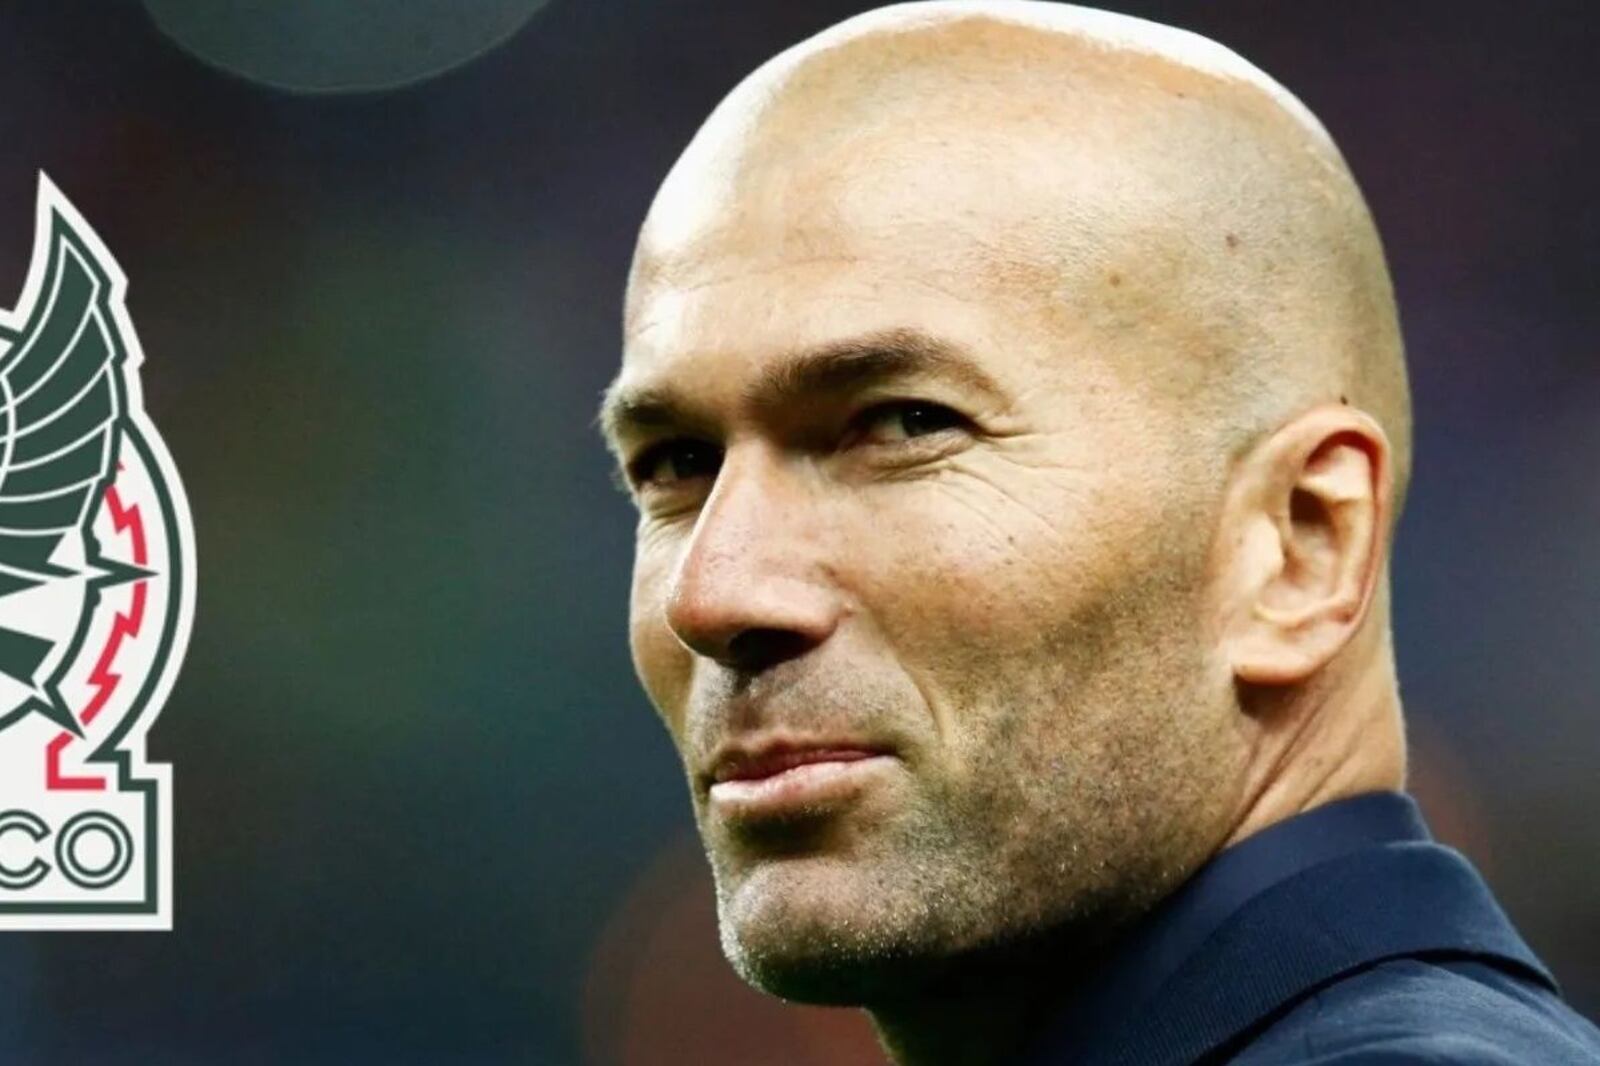 Welcome to Mexico Zidane, the condition he put to work with the National Team